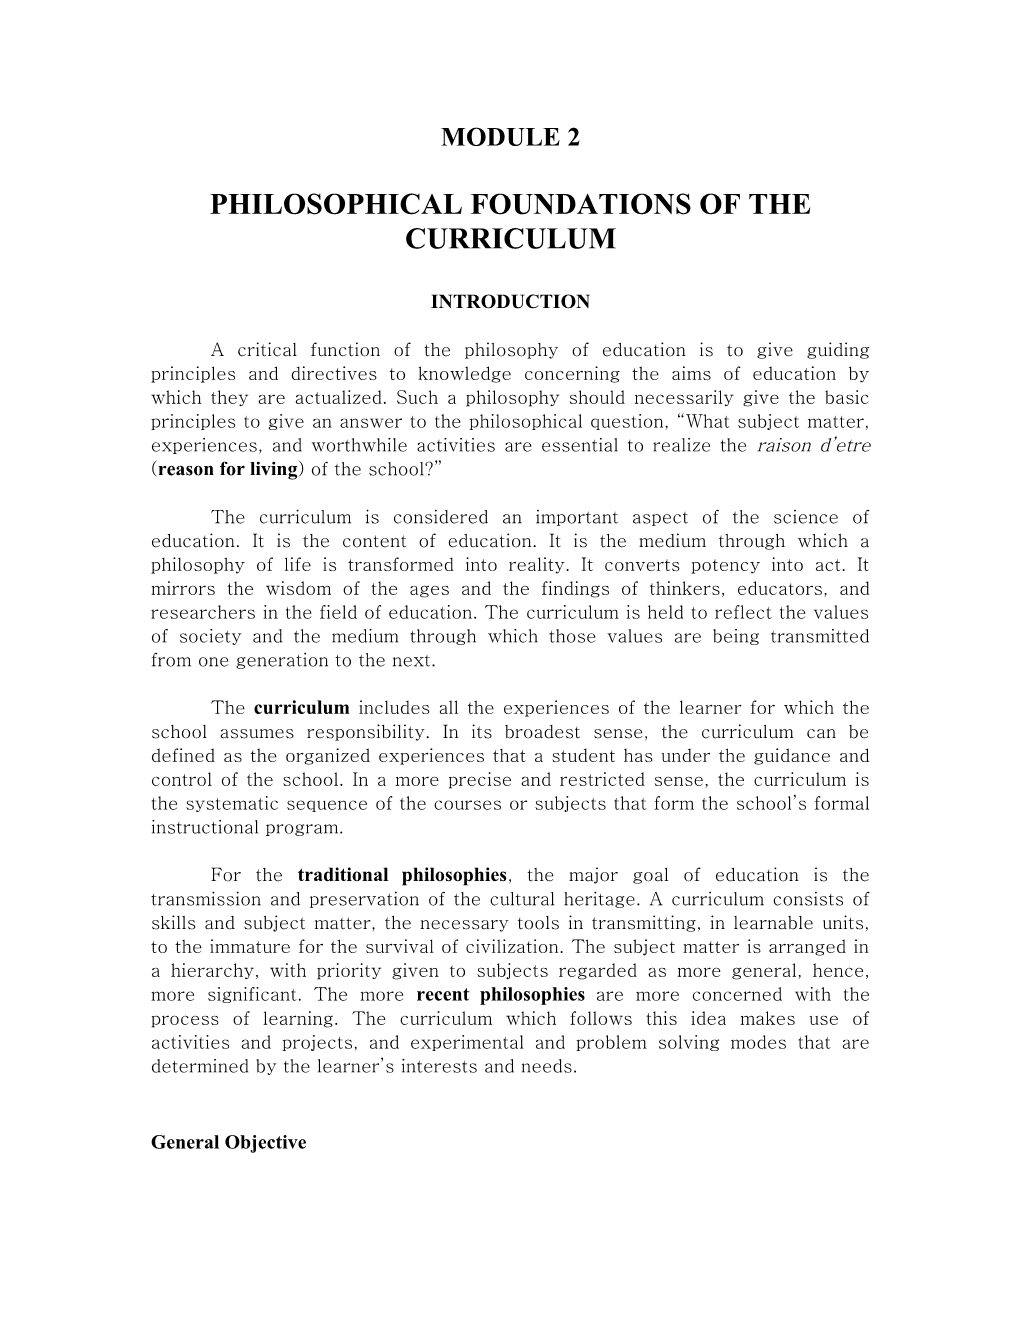 Philosophical Foundations of the Curriculum